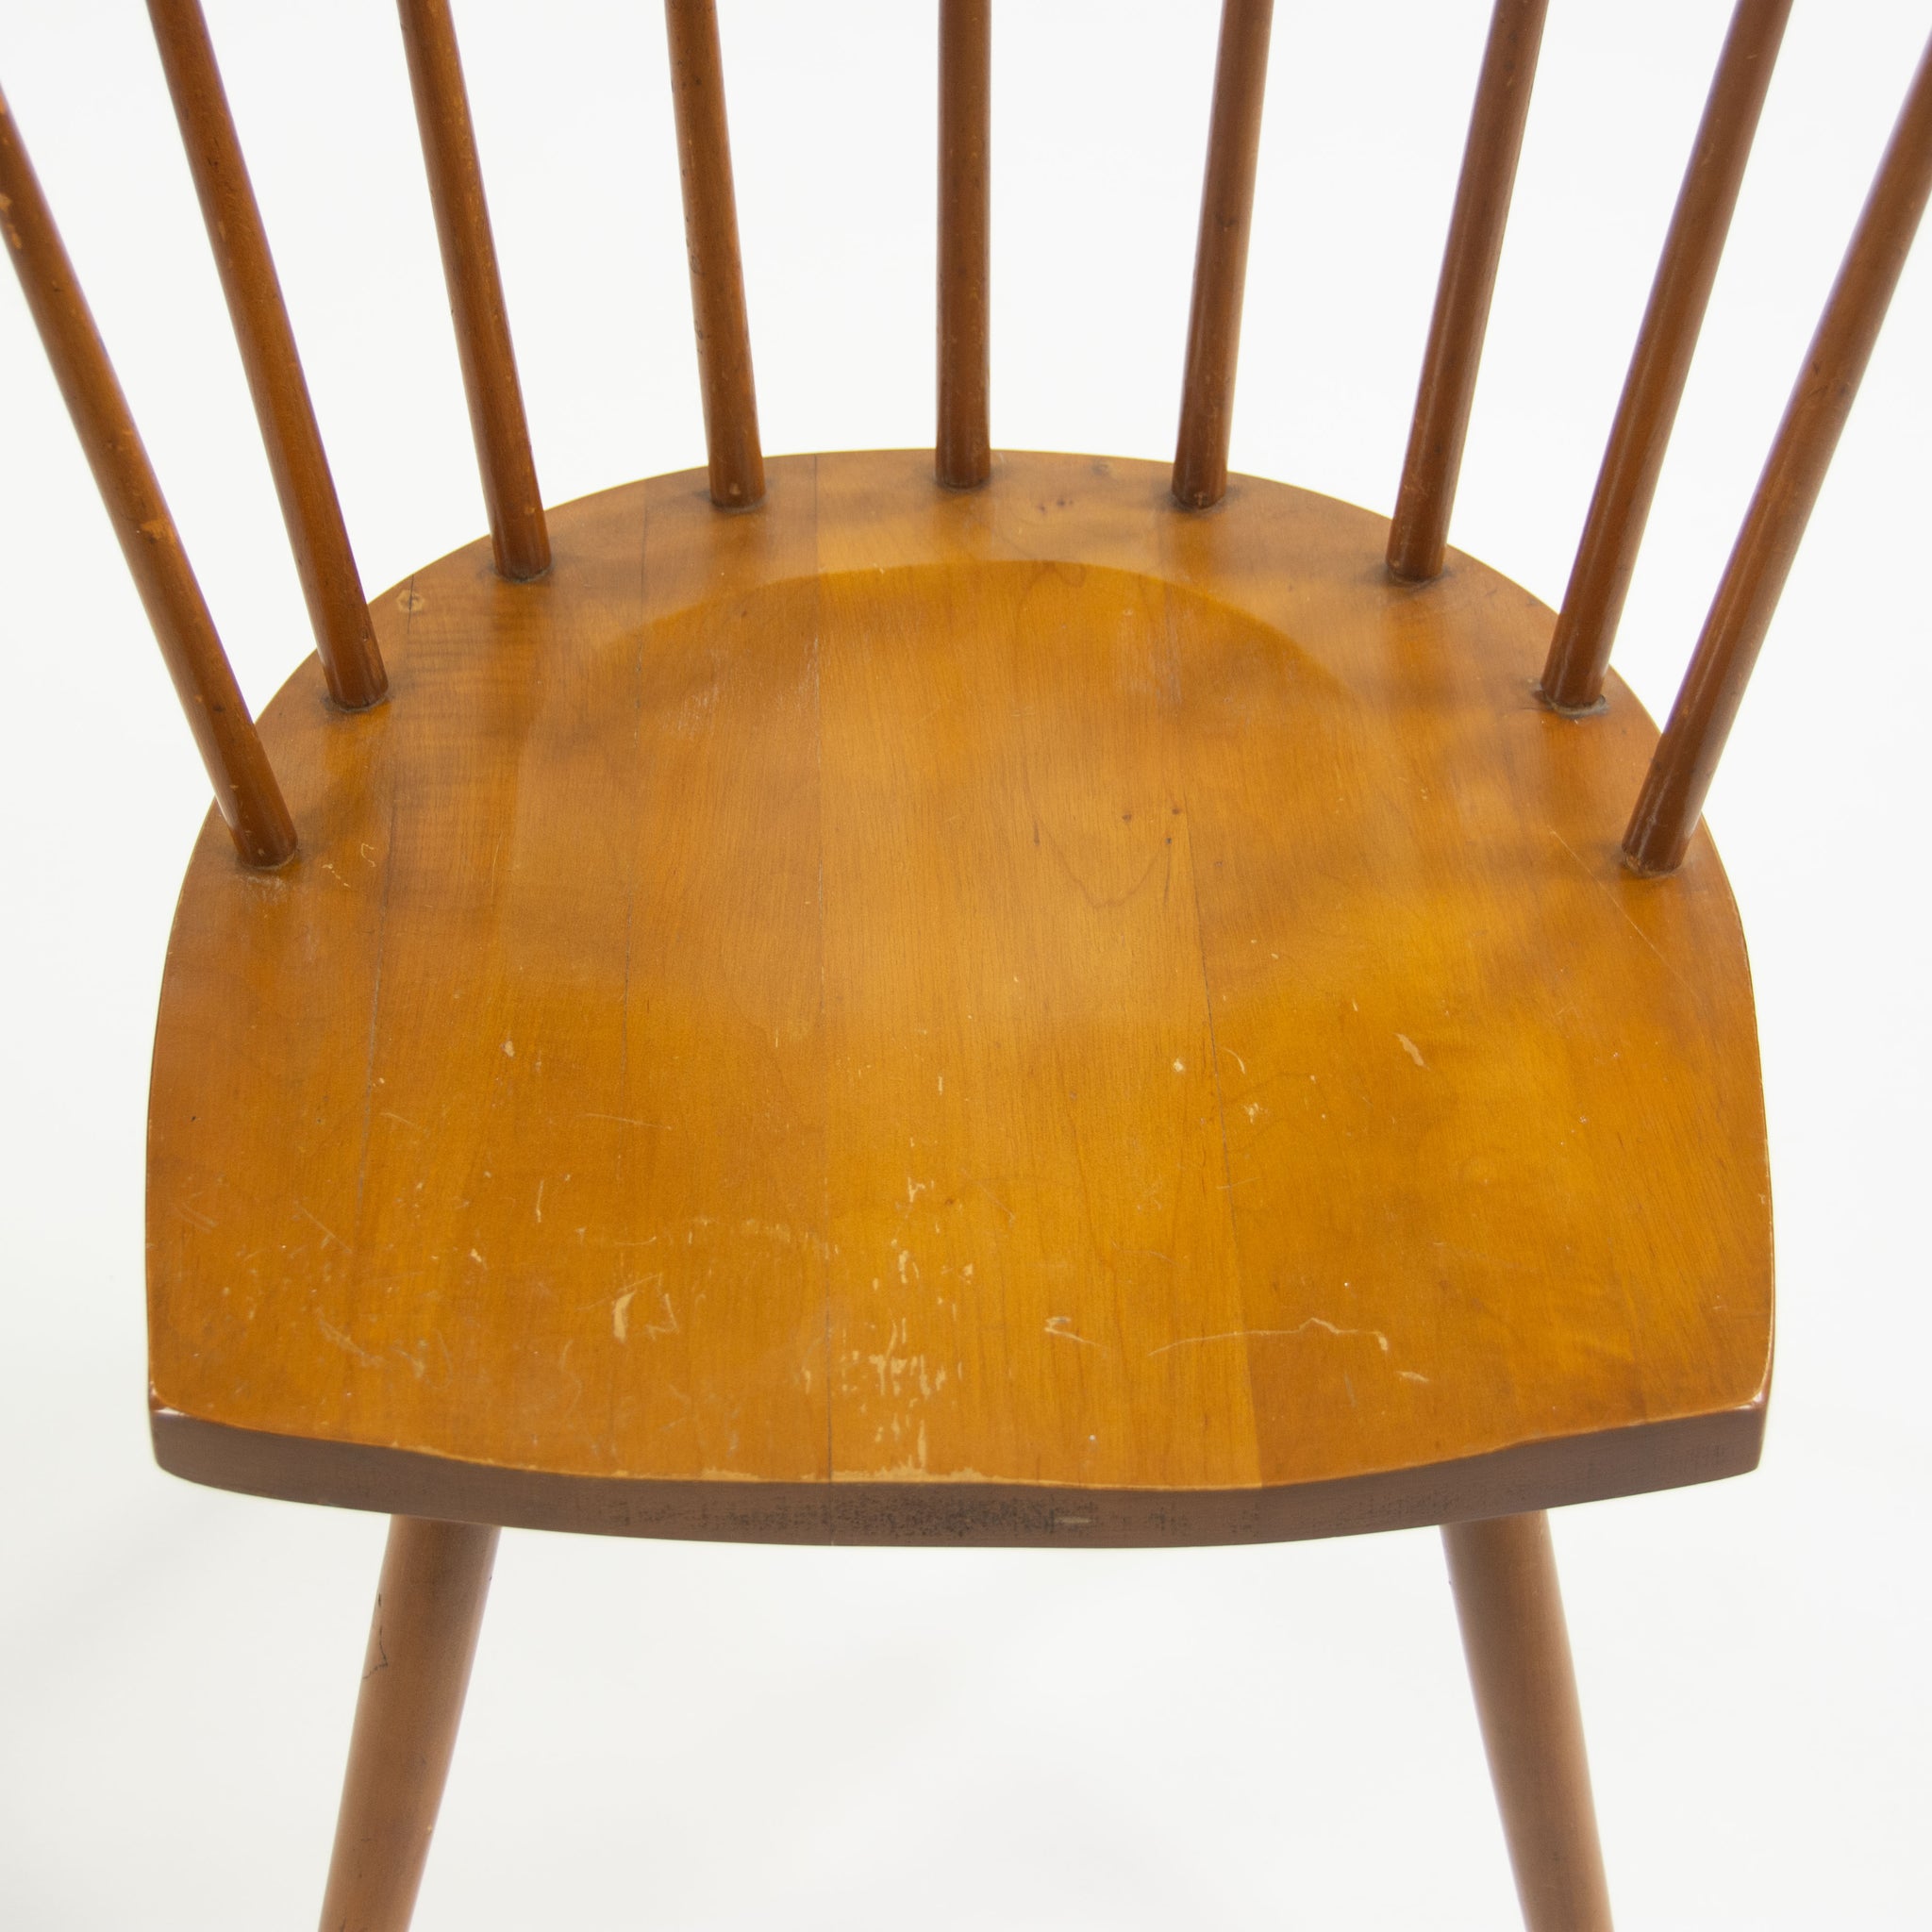 SOLD 1940's Early Vintage Knoll Associates George Nakashima Straight Chair Cherry